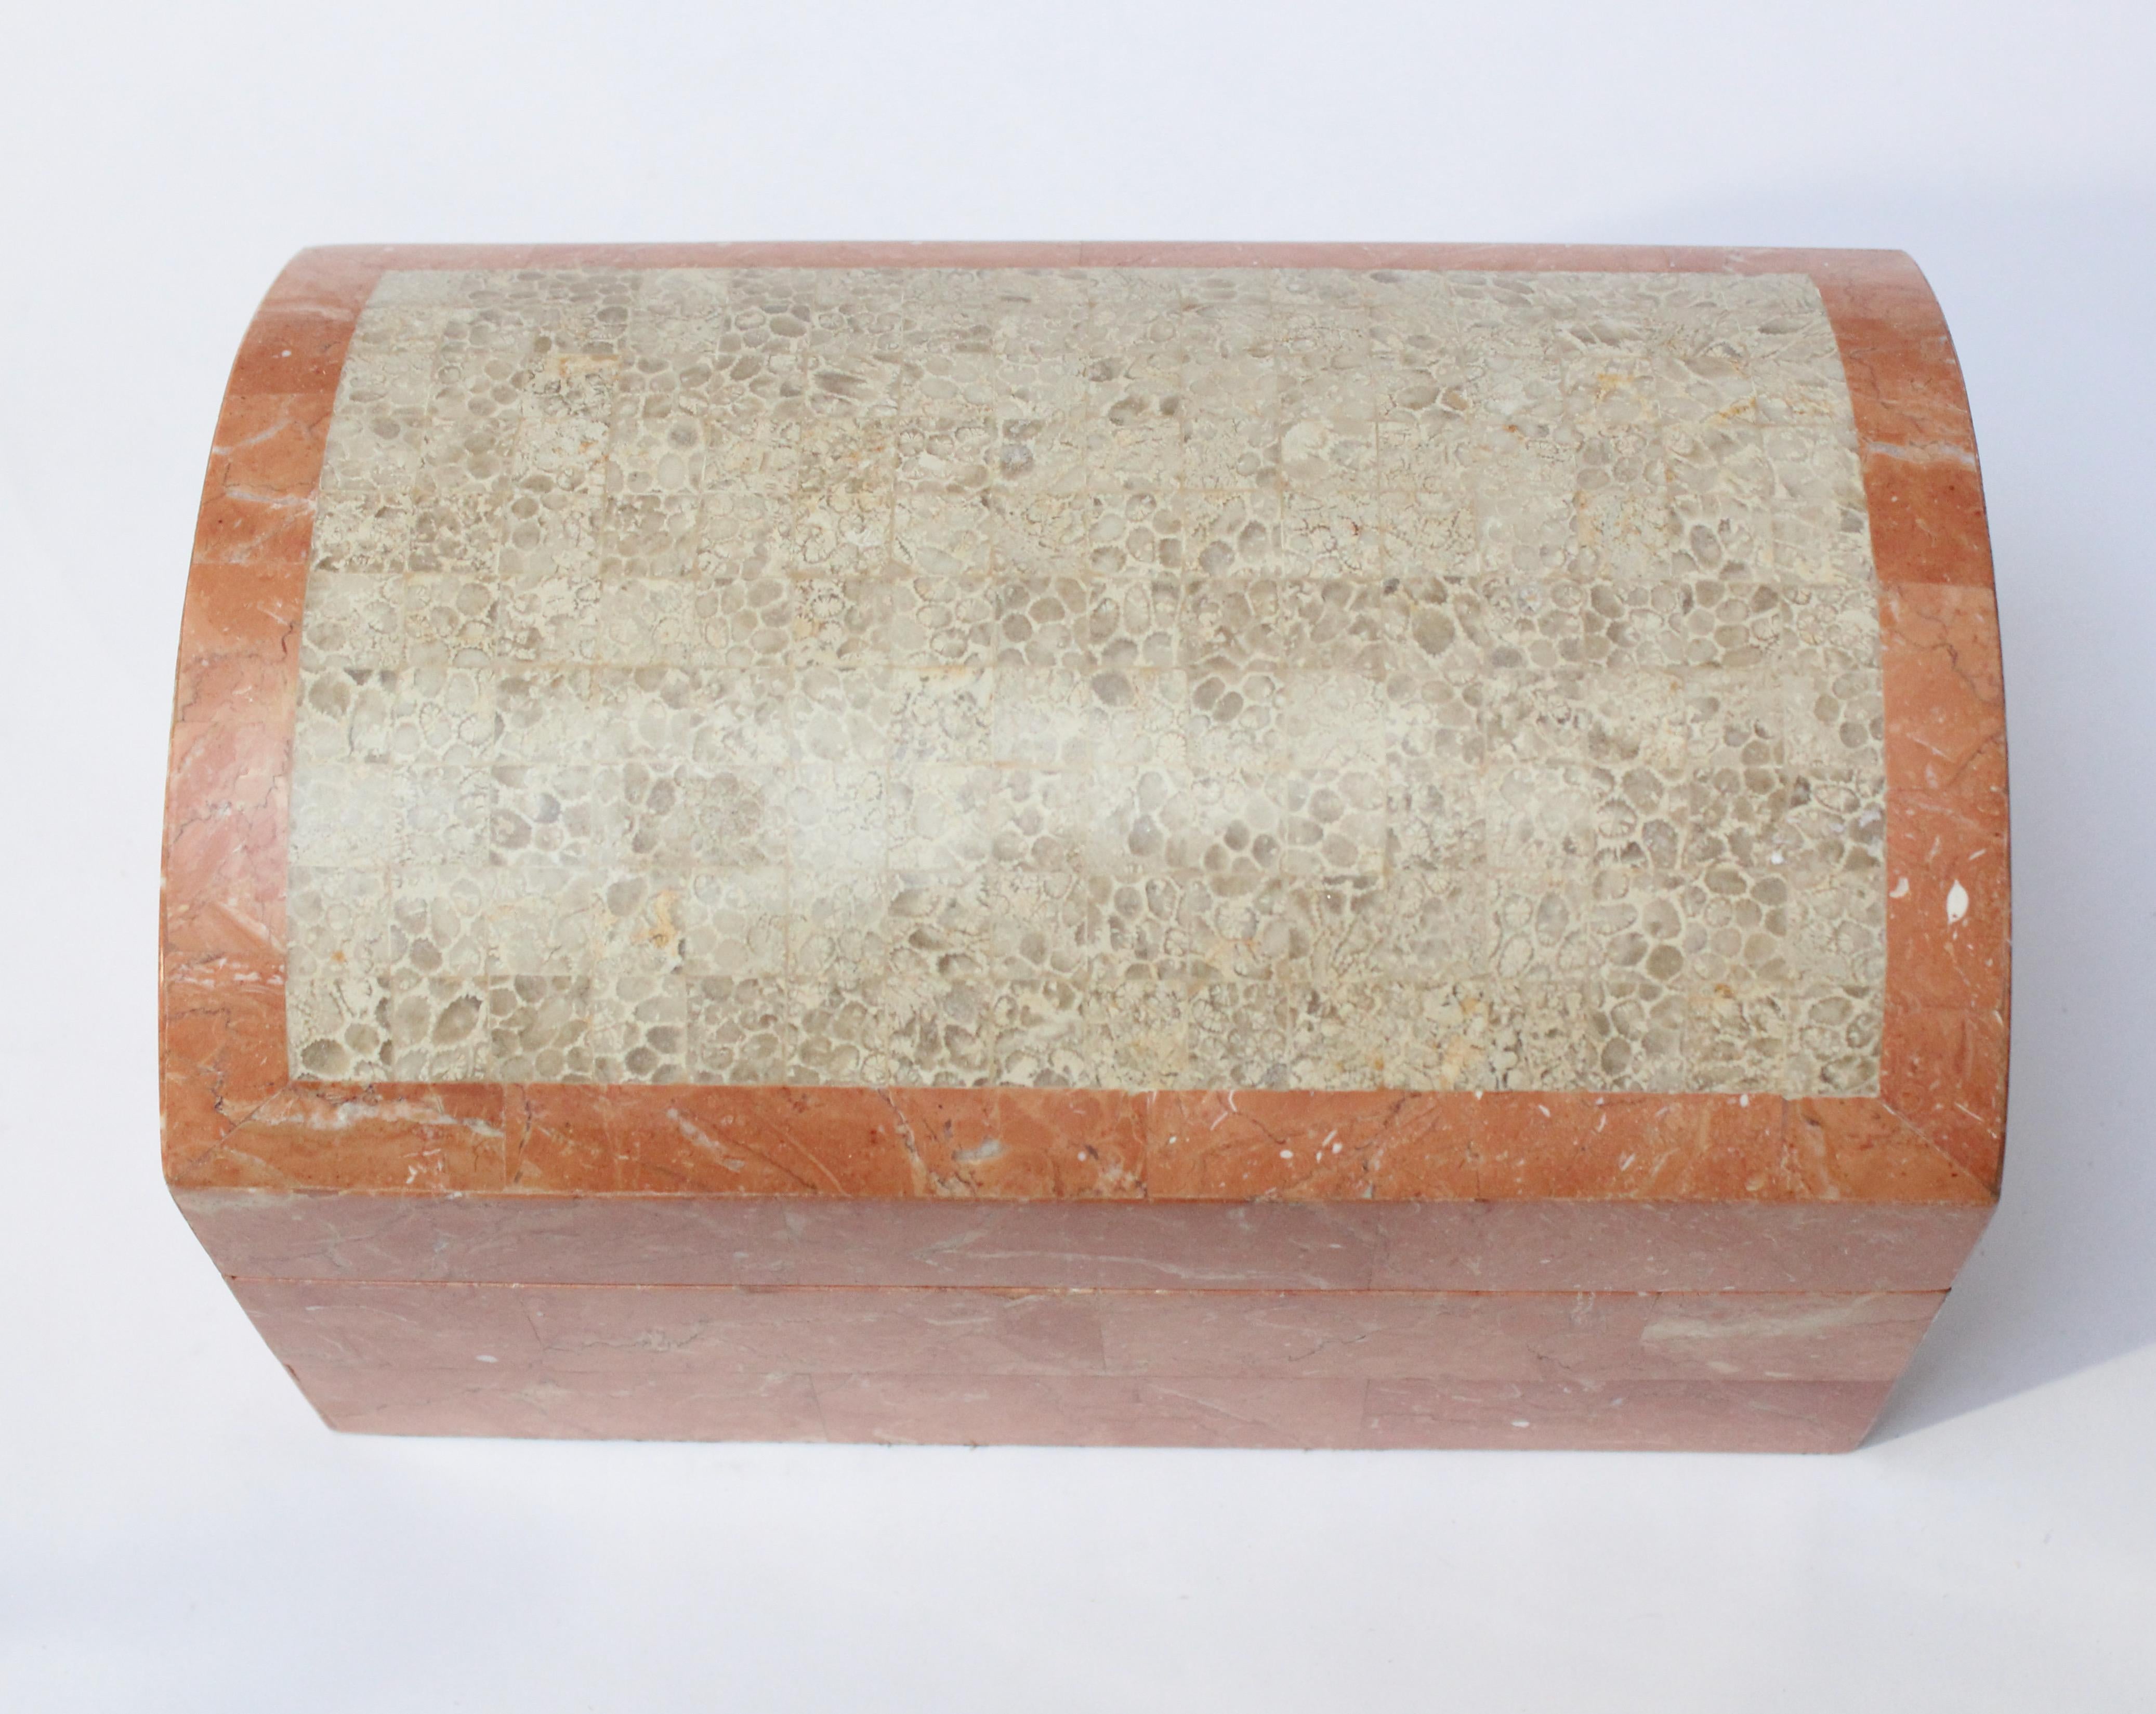 Ca. 1970s Maitland Smith tessellated coral stone hinged jewelry / trinket box in two tone pale gray and pink with cedar interior.
Excellent, vintage condition free of chips / losses.
Measures: H: 5.5